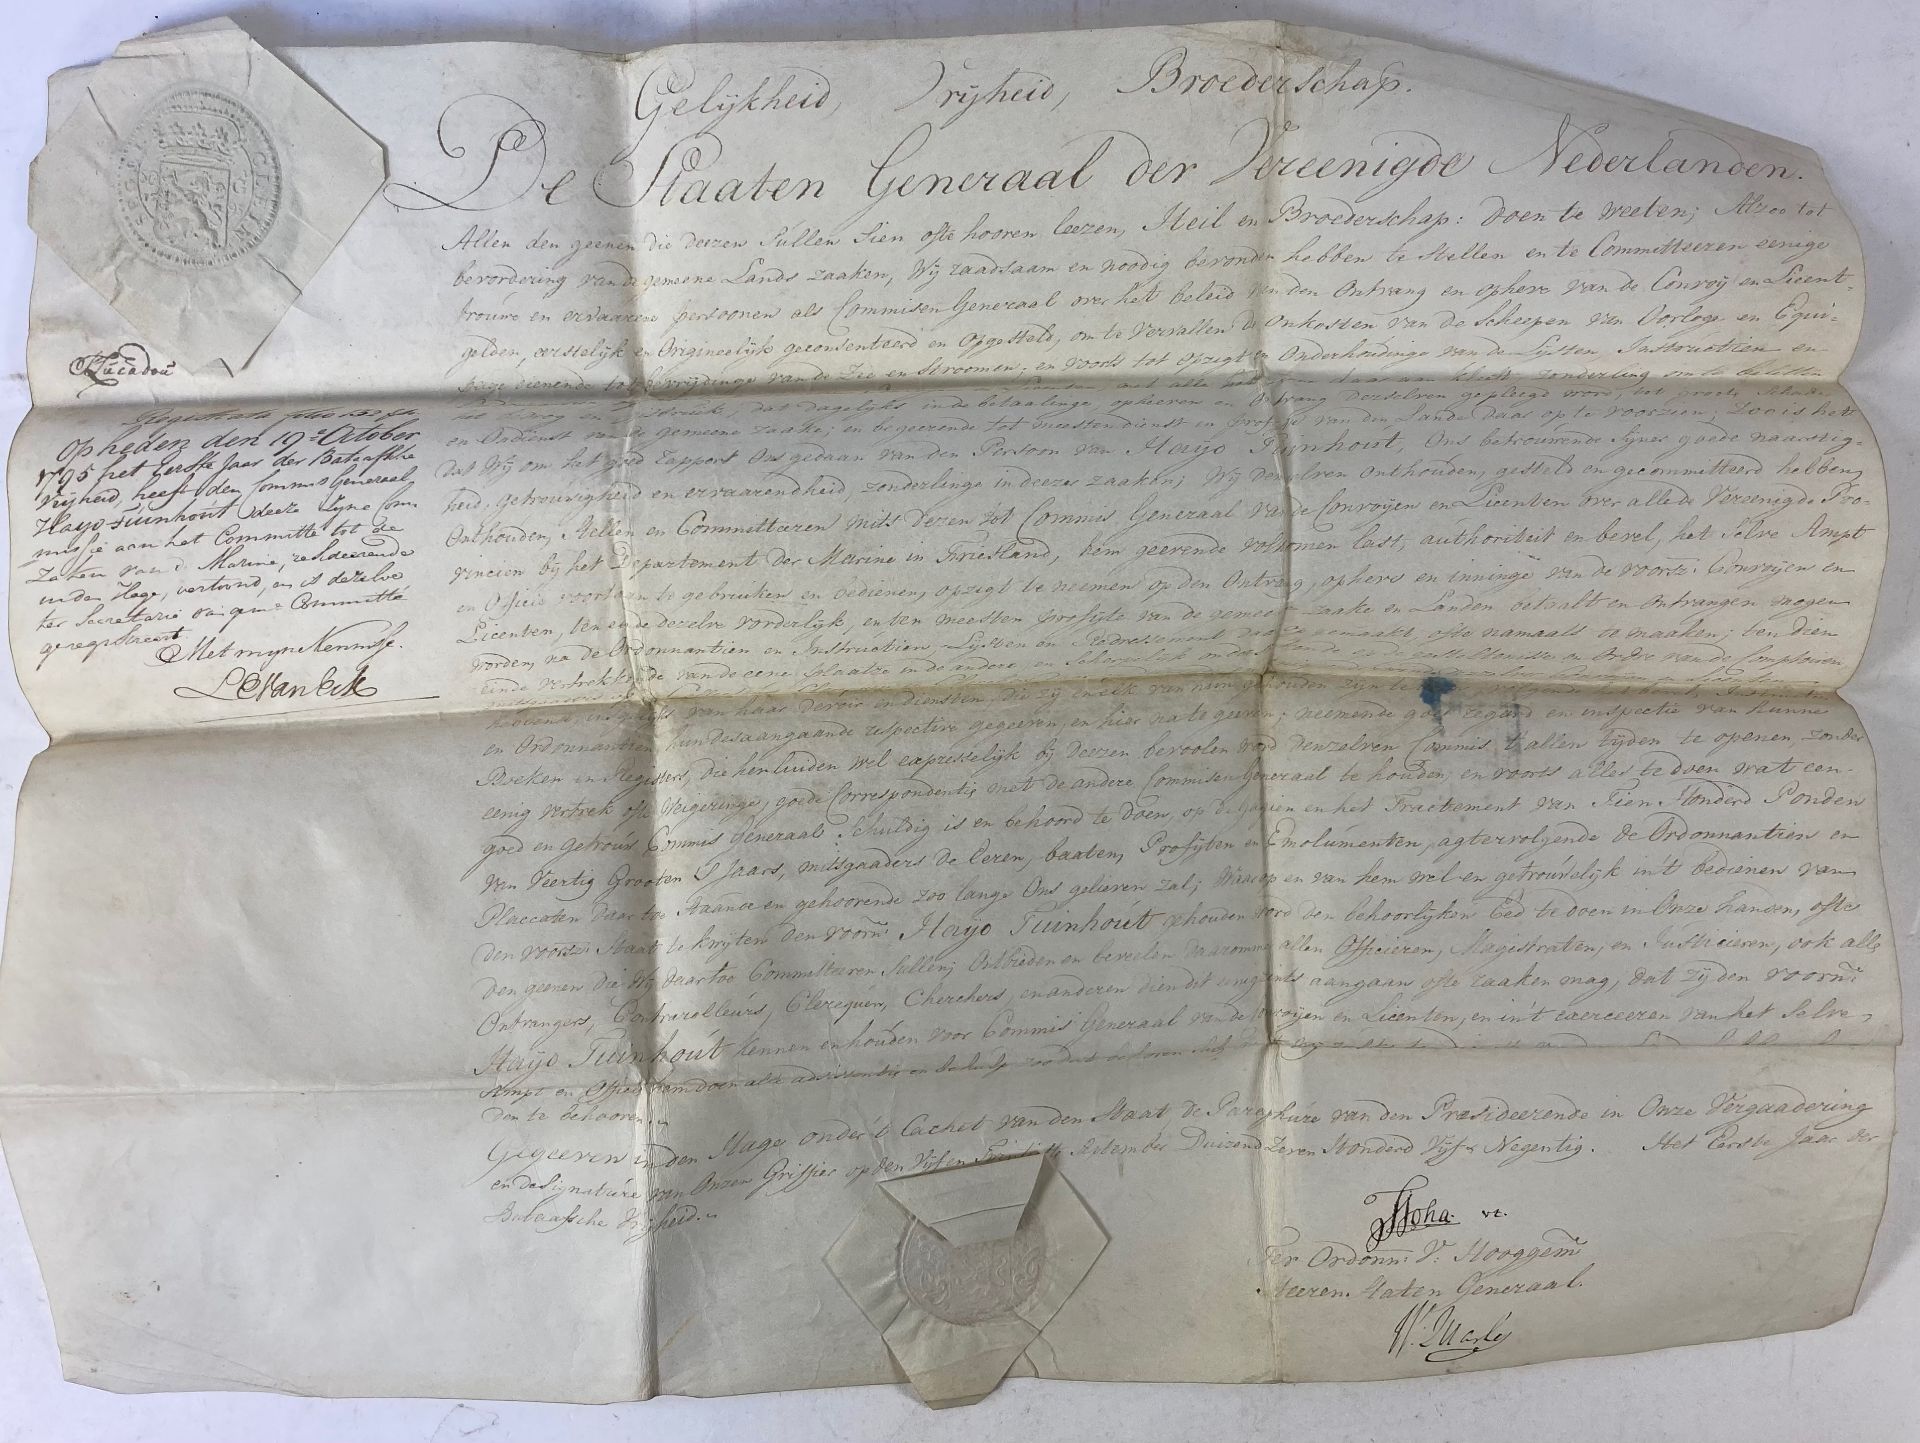 CONVOYS & LICENSES -- LETTER OF APPOINTMENT written out to Hayo Tuinhout (1757-1811) as